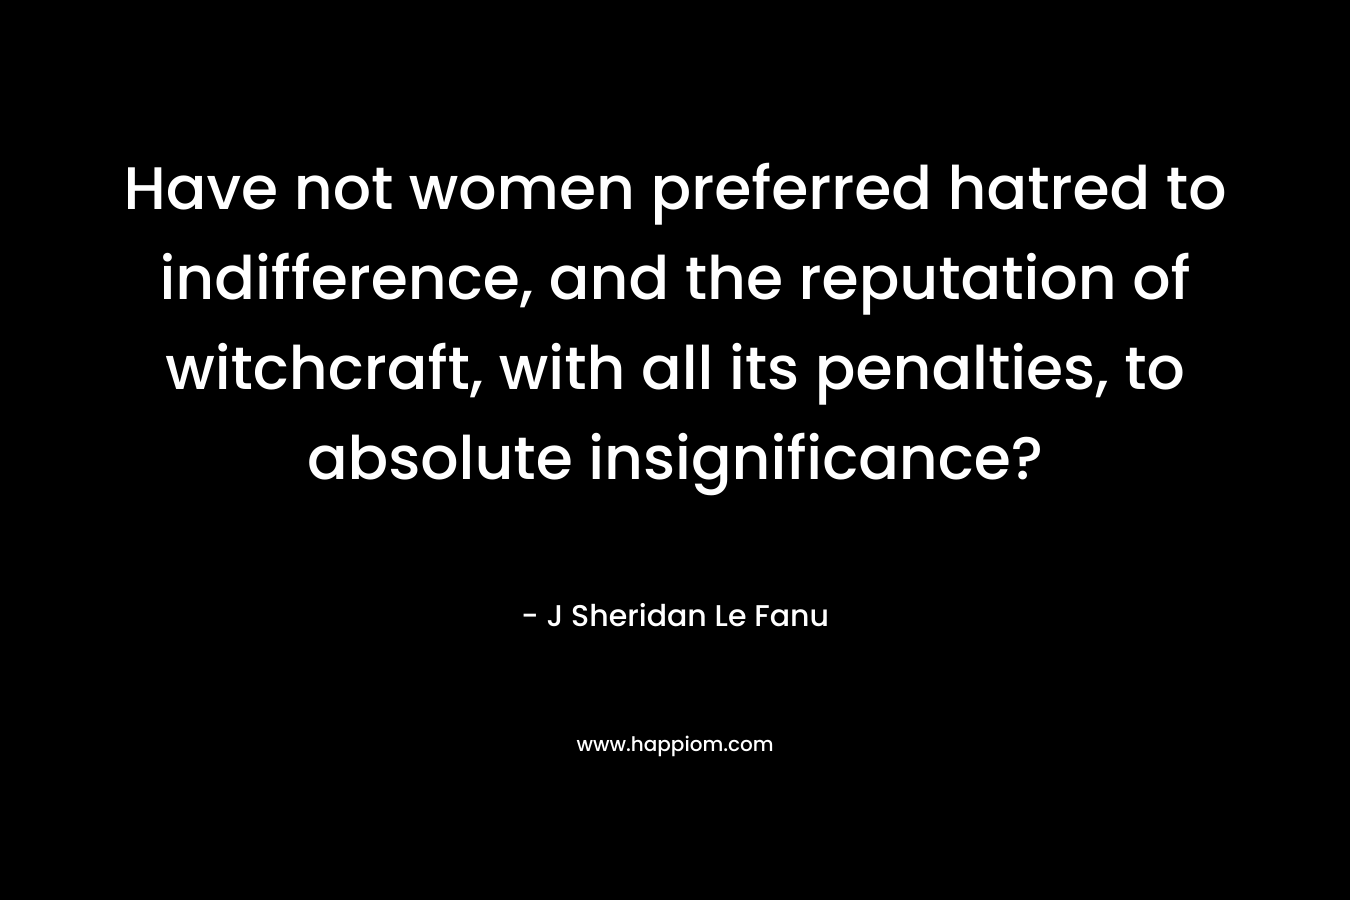 Have not women preferred hatred to indifference, and the reputation of witchcraft, with all its penalties, to absolute insignificance? – J Sheridan Le Fanu